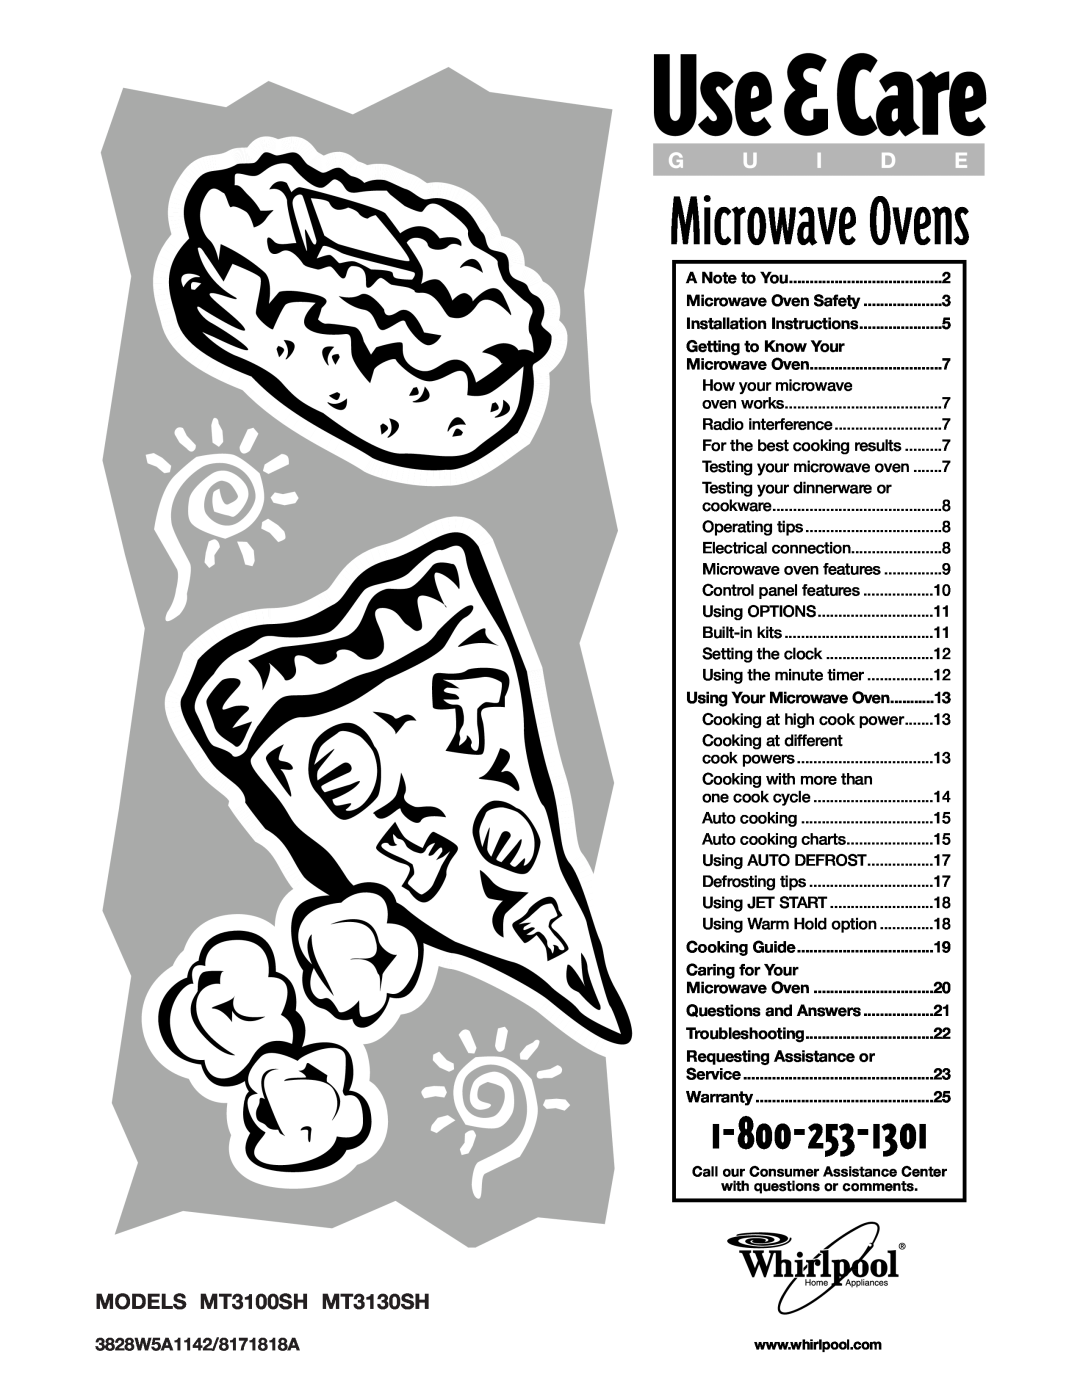 Whirlpool installation instructions Microwave Ovens, MODELS MT3100SH MT3130SH, A Note to You, Getting to Know Your 